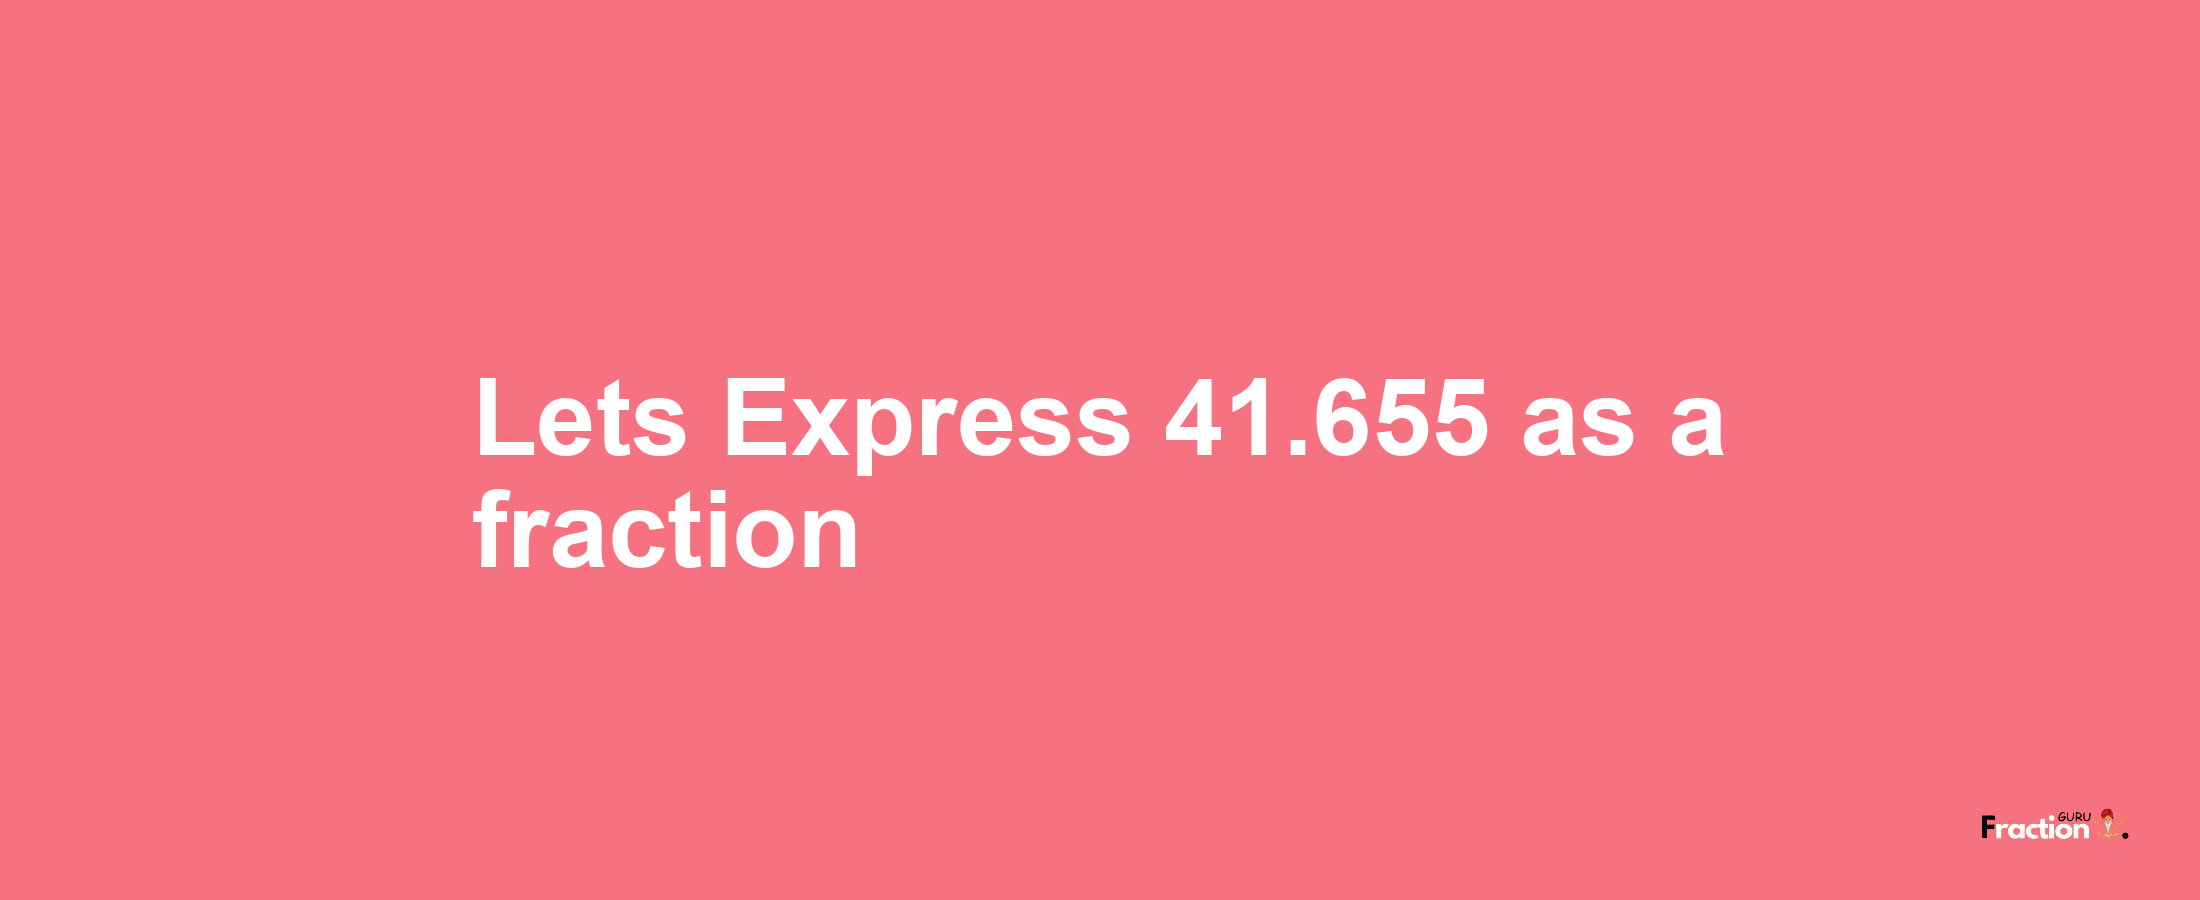 Lets Express 41.655 as afraction